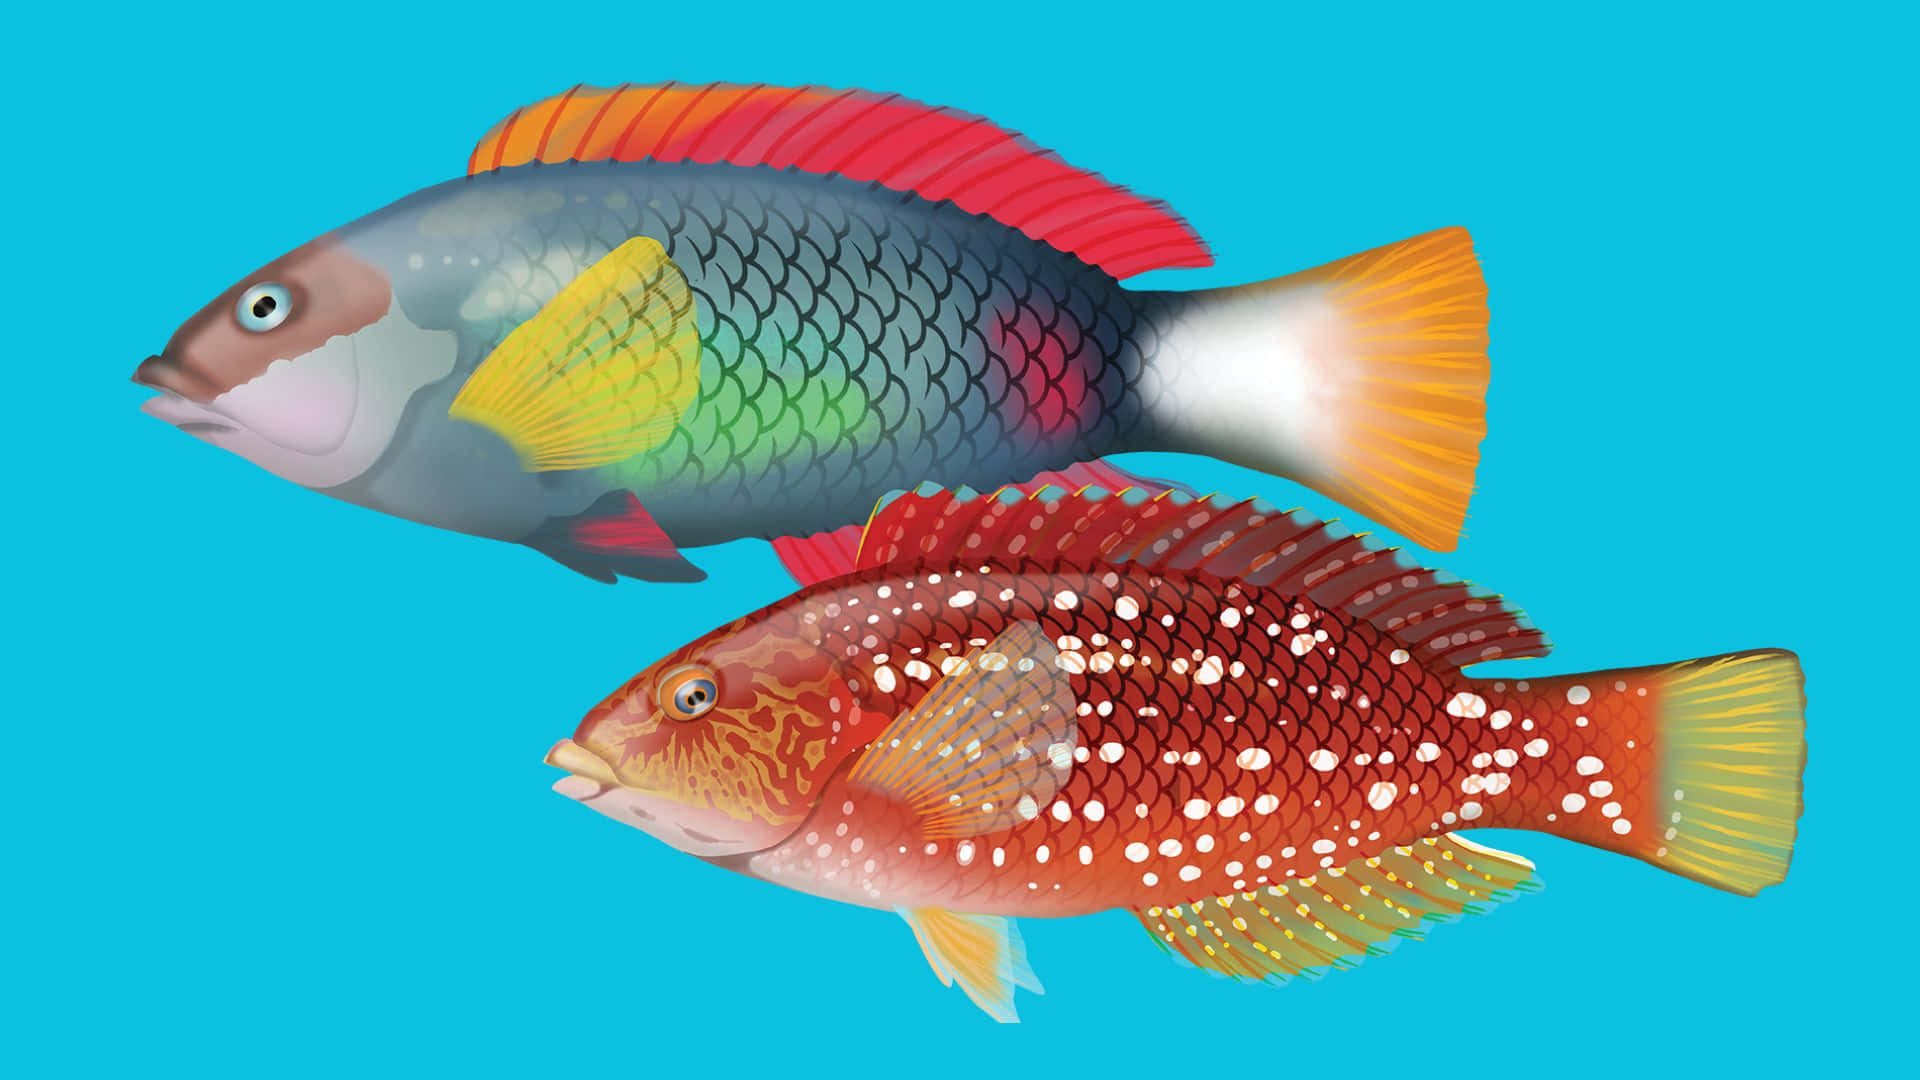 A Stunning View Of The Colorful Wrasse Fish In Its Natural Habitat Wallpaper